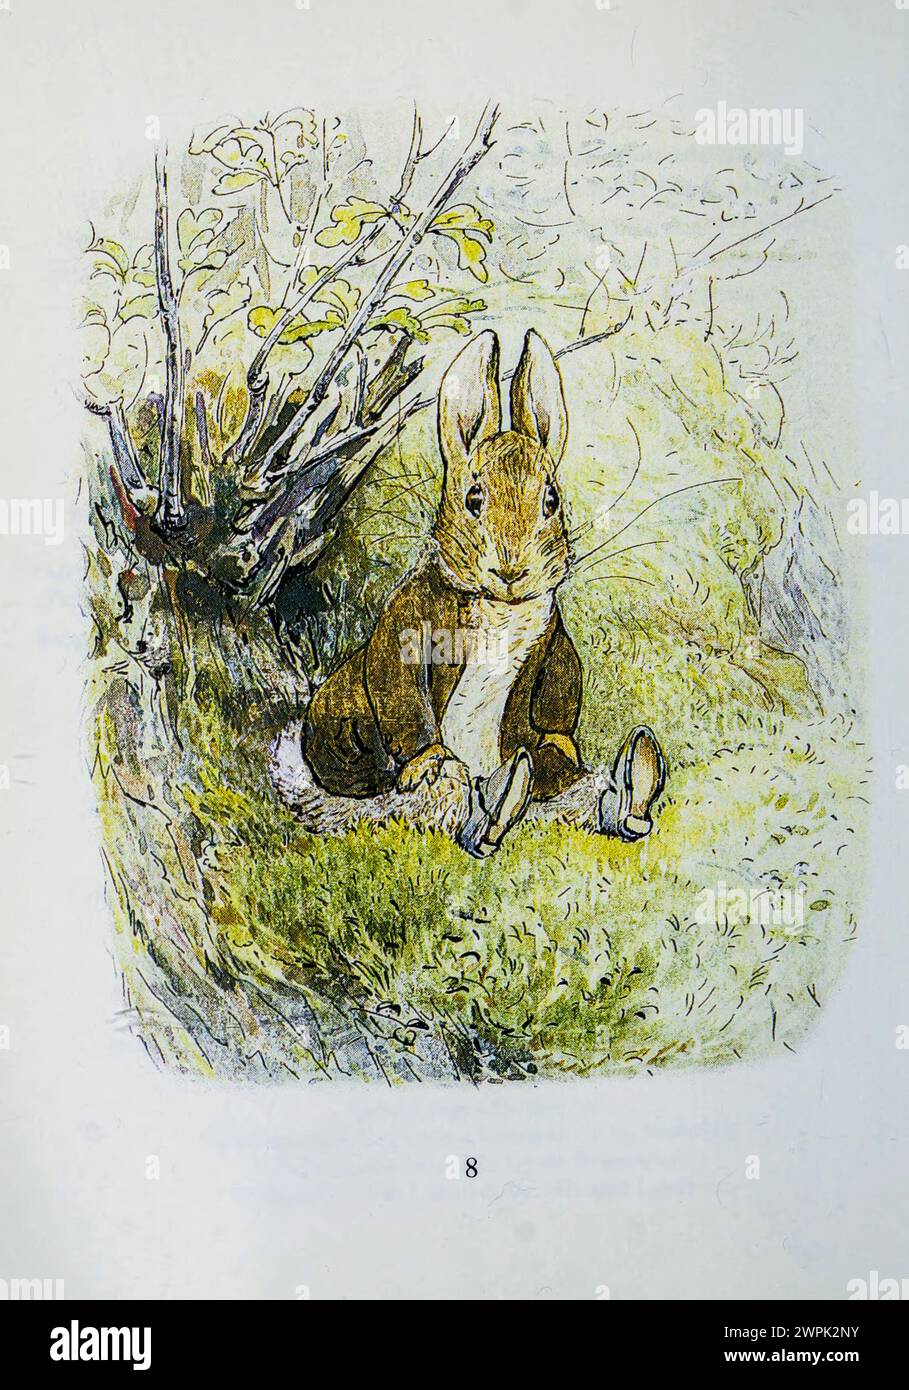 The Tale of Benjamin Bunny is a children's book written and illustrated by Beatrix Potter, and first published by Frederick Warne & Co. in September 1904. The book is a sequel to The Tale of Peter Rabbit (1902), and tells of Peter's return to Mr. McGregor's garden with his cousin Benjamin to retrieve the clothes he lost there during his previous adventure. Stock Photo